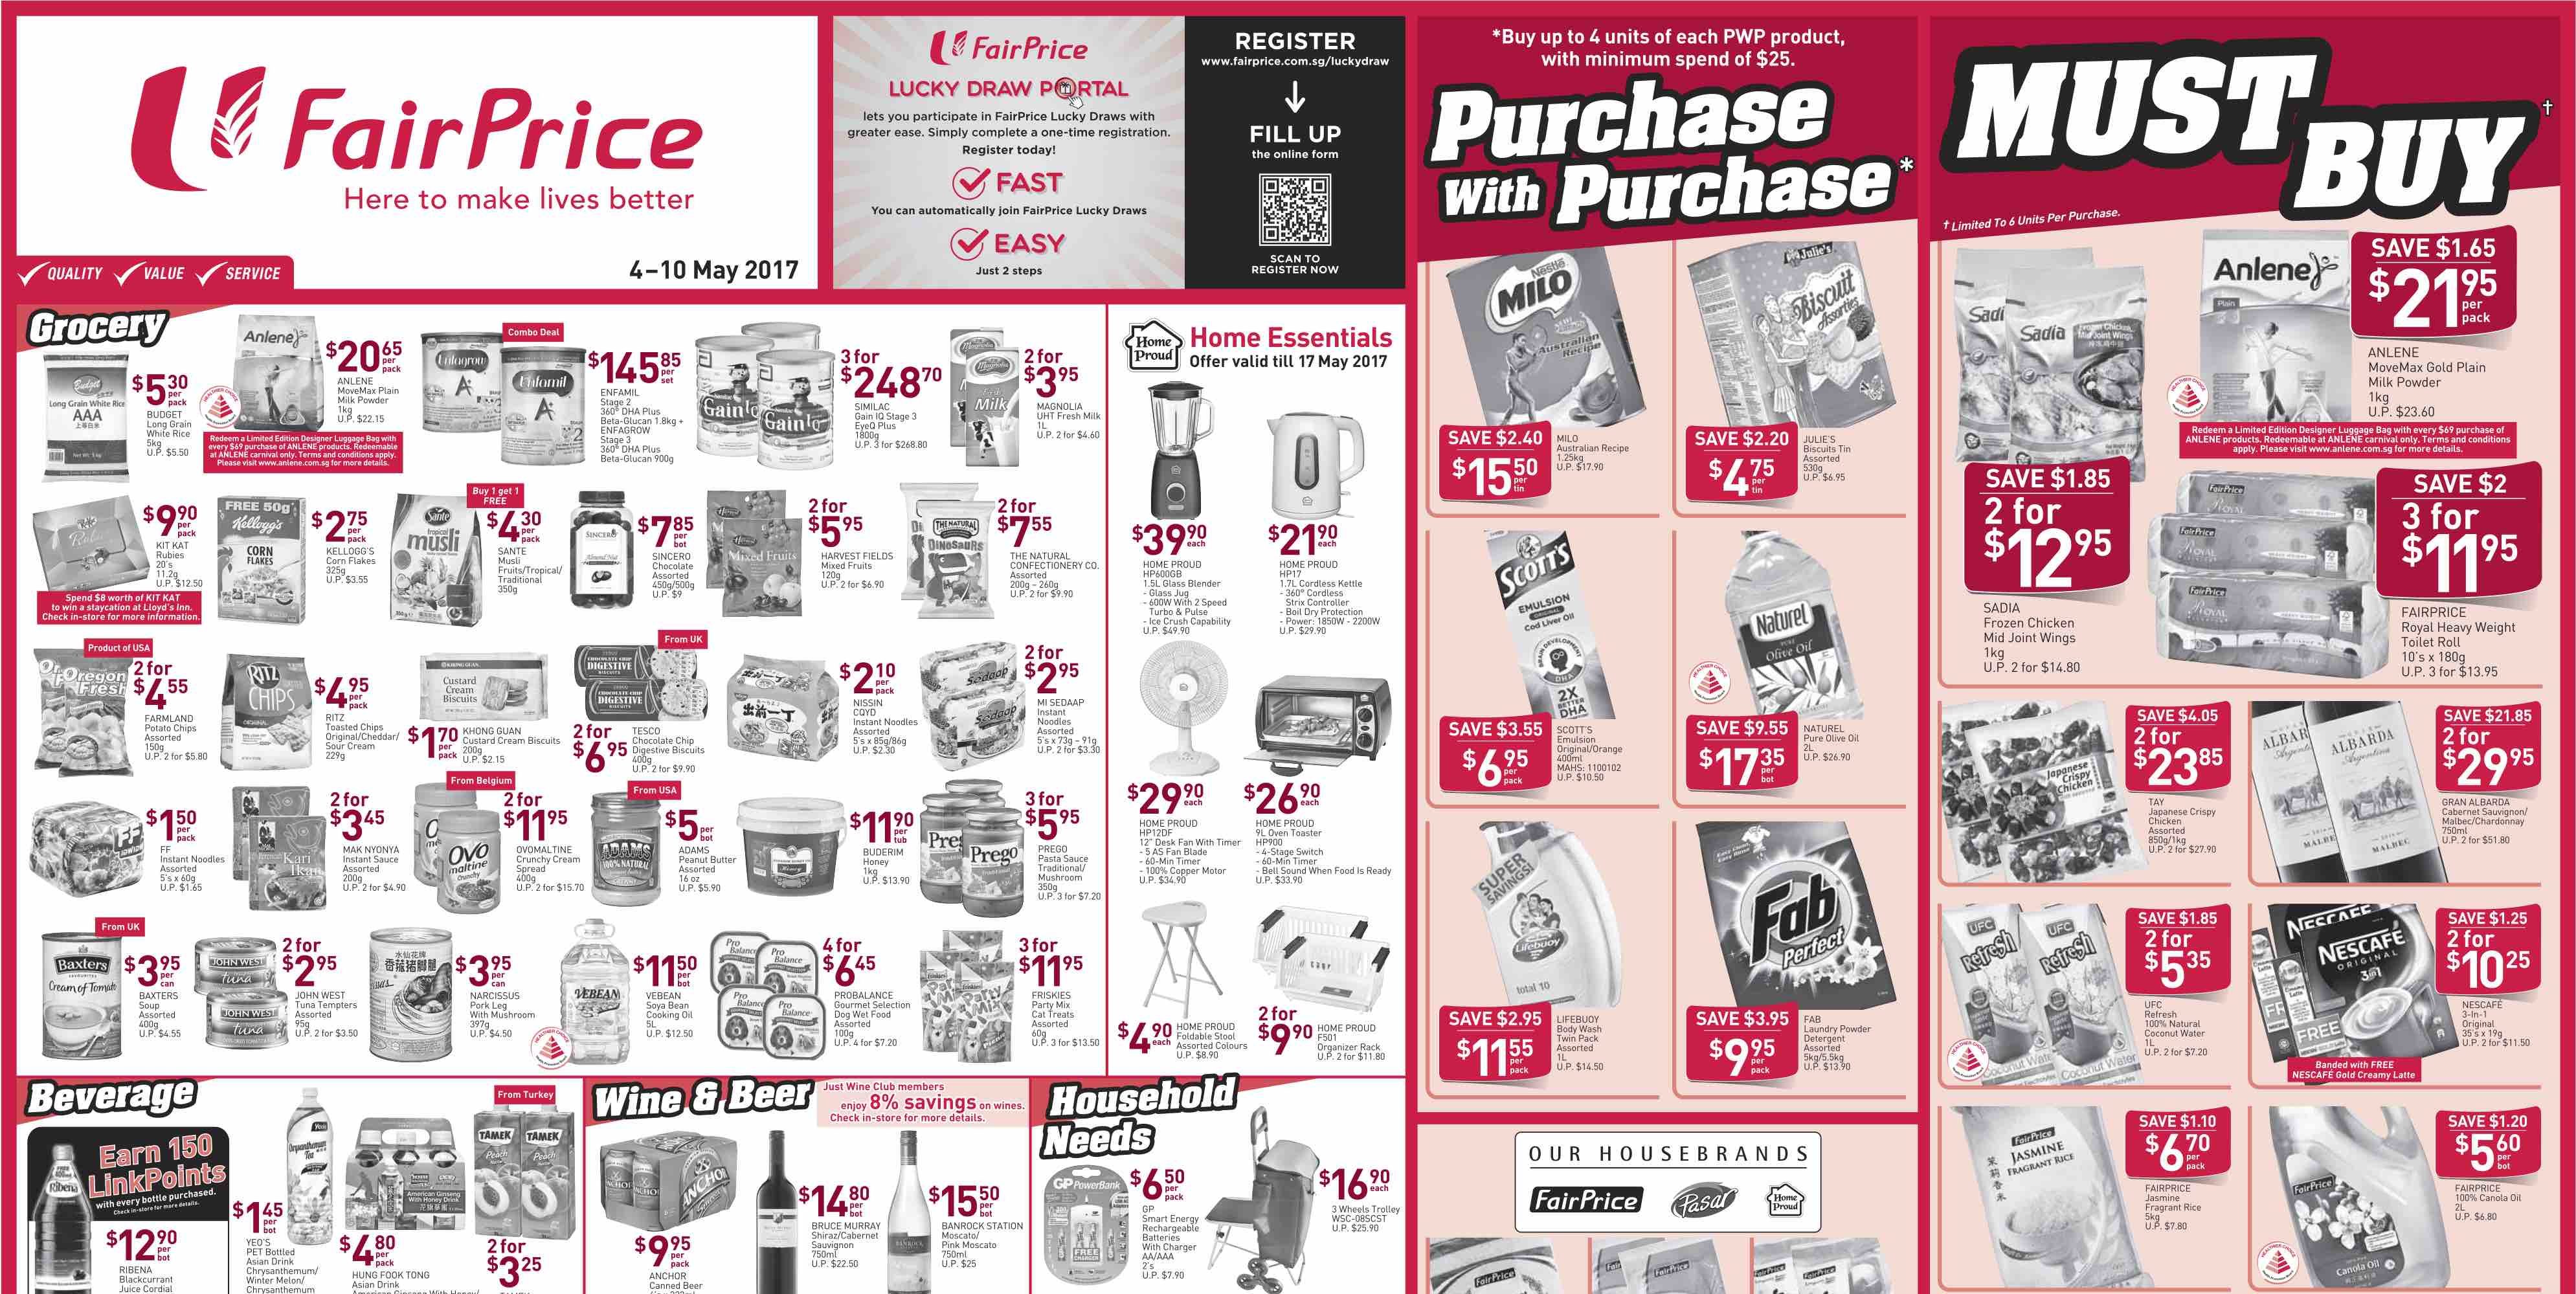 NTUC FairPrice Singapore Your Weekly Saver Promotion 4-10 May 2017